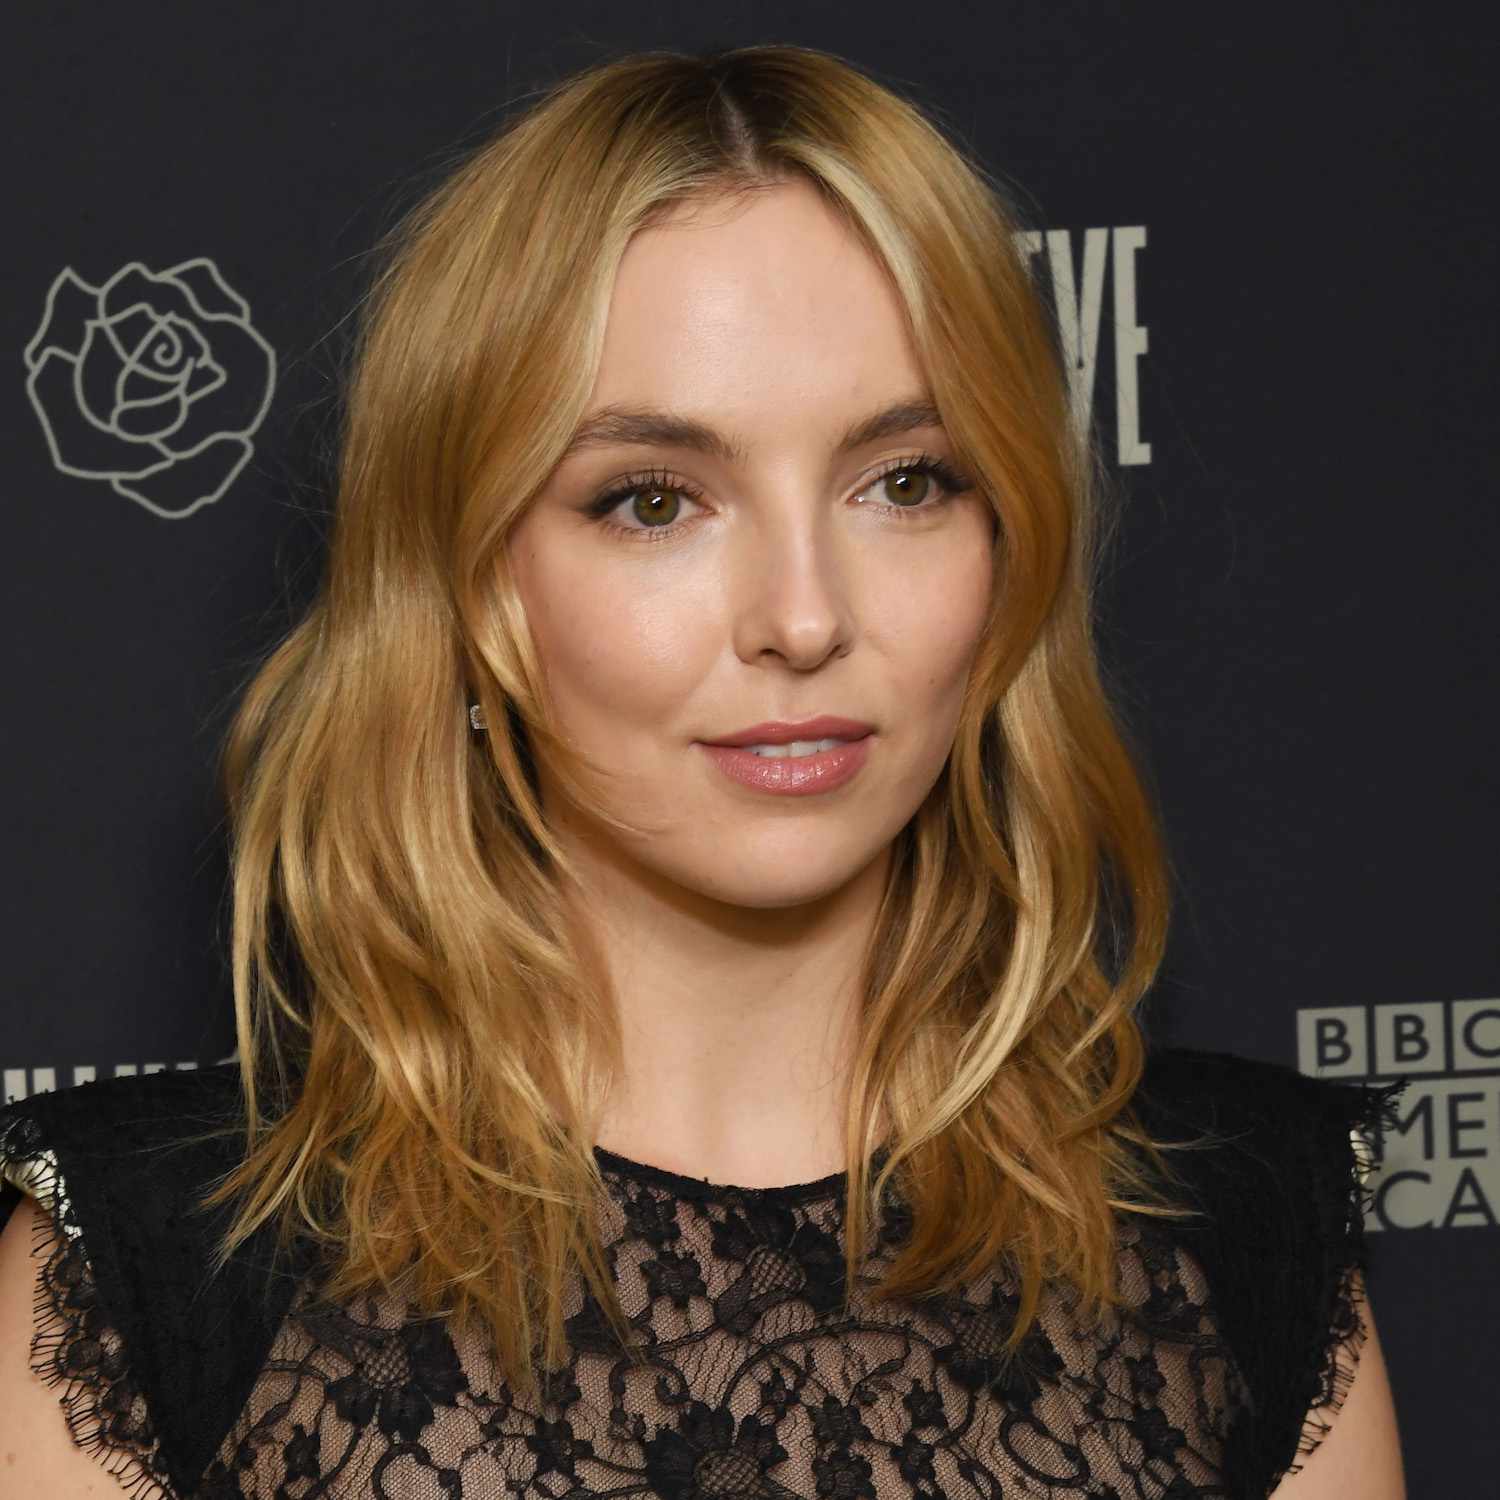 Jodie Comer wears a medium-length hairstyle with face-framing layers